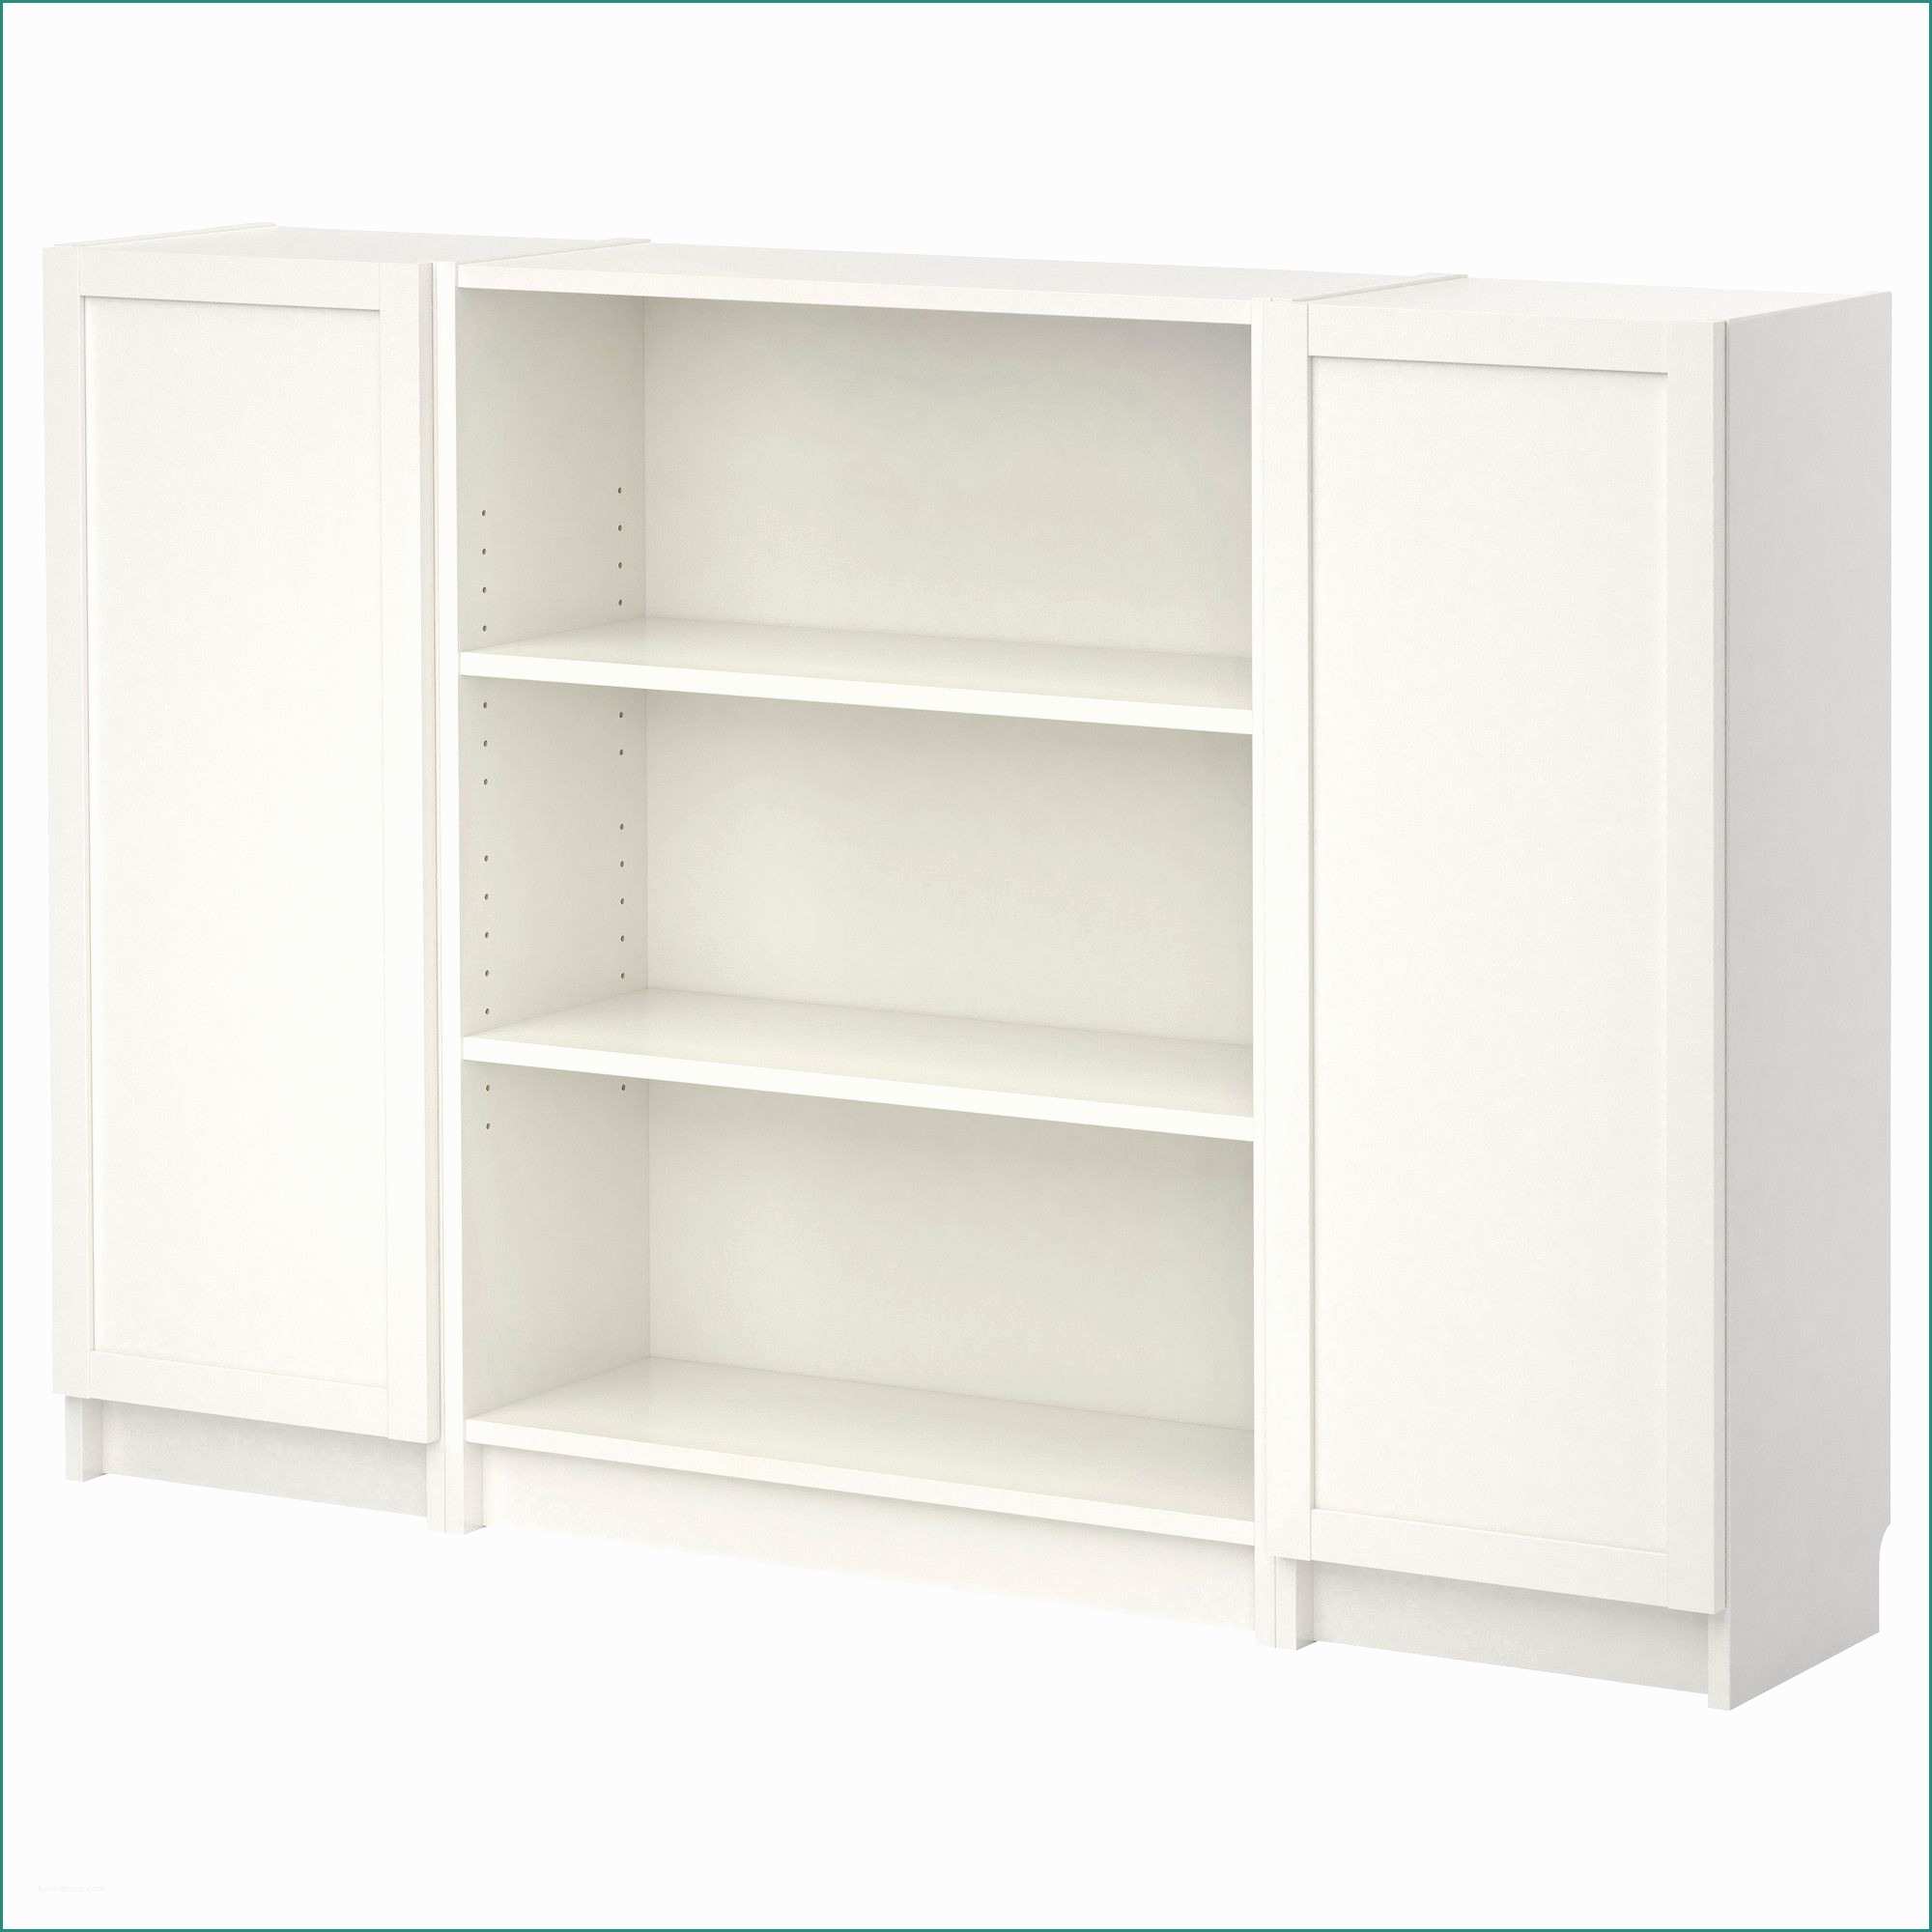 Cucina Scavolini Liberamente E Billy Bookcase with Doors White Ikea Would Like This Set Up for